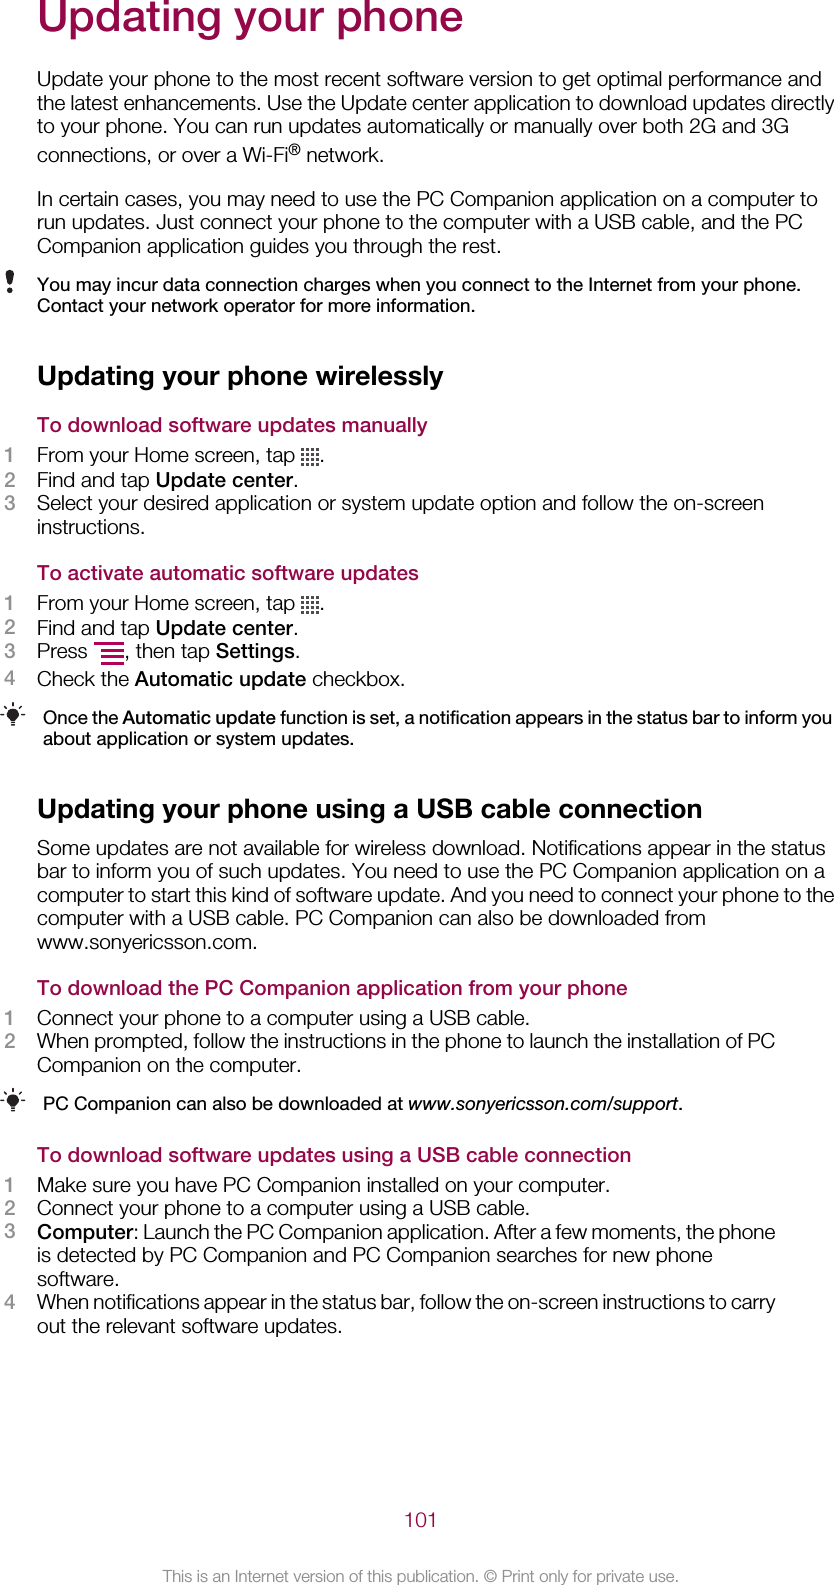 Updating your phoneUpdate your phone to the most recent software version to get optimal performance andthe latest enhancements. Use the Update center application to download updates directlyto your phone. You can run updates automatically or manually over both 2G and 3Gconnections, or over a Wi-Fi® network.In certain cases, you may need to use the PC Companion application on a computer torun updates. Just connect your phone to the computer with a USB cable, and the PCCompanion application guides you through the rest.You may incur data connection charges when you connect to the Internet from your phone.Contact your network operator for more information.Updating your phone wirelesslyTo download software updates manually1From your Home screen, tap  .2Find and tap Update center.3Select your desired application or system update option and follow the on-screeninstructions.To activate automatic software updates1From your Home screen, tap  .2Find and tap Update center.3Press  , then tap Settings.4Check the Automatic update checkbox.Once the Automatic update function is set, a notification appears in the status bar to inform youabout application or system updates.Updating your phone using a USB cable connectionSome updates are not available for wireless download. Notifications appear in the statusbar to inform you of such updates. You need to use the PC Companion application on acomputer to start this kind of software update. And you need to connect your phone to thecomputer with a USB cable. PC Companion can also be downloaded fromwww.sonyericsson.com.To download the PC Companion application from your phone1Connect your phone to a computer using a USB cable.2When prompted, follow the instructions in the phone to launch the installation of PCCompanion on the computer.PC Companion can also be downloaded at www.sonyericsson.com/support.To download software updates using a USB cable connection1Make sure you have PC Companion installed on your computer.2Connect your phone to a computer using a USB cable.3Computer: Launch the PC Companion application. After a few moments, the phoneis detected by PC Companion and PC Companion searches for new phonesoftware.4When notifications appear in the status bar, follow the on-screen instructions to carryout the relevant software updates.101This is an Internet version of this publication. © Print only for private use.